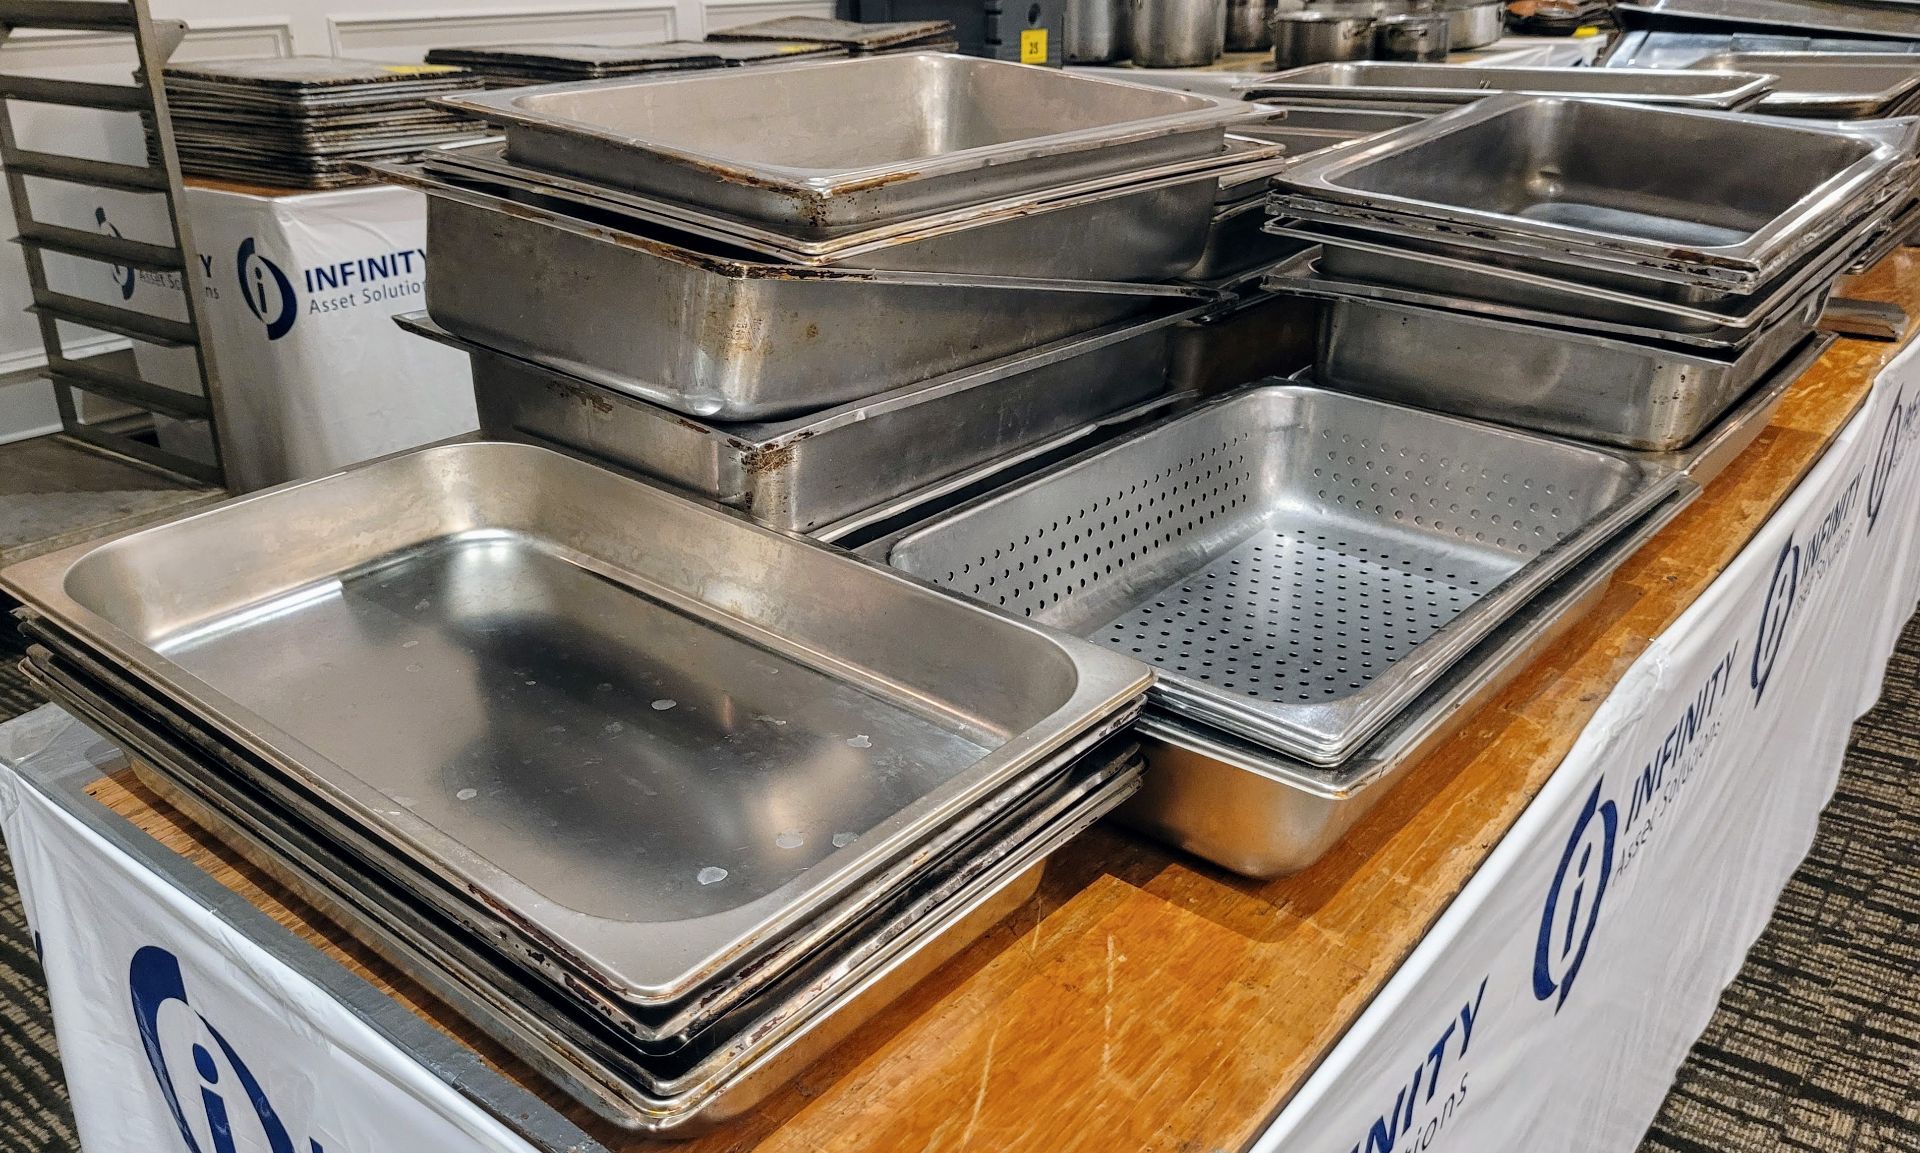 LOT - LARGE ASSORTMENT OF CHAFING DISH COMPONENTS: INSERTS, LIDS WATER TRAYS, ETC - Image 6 of 8